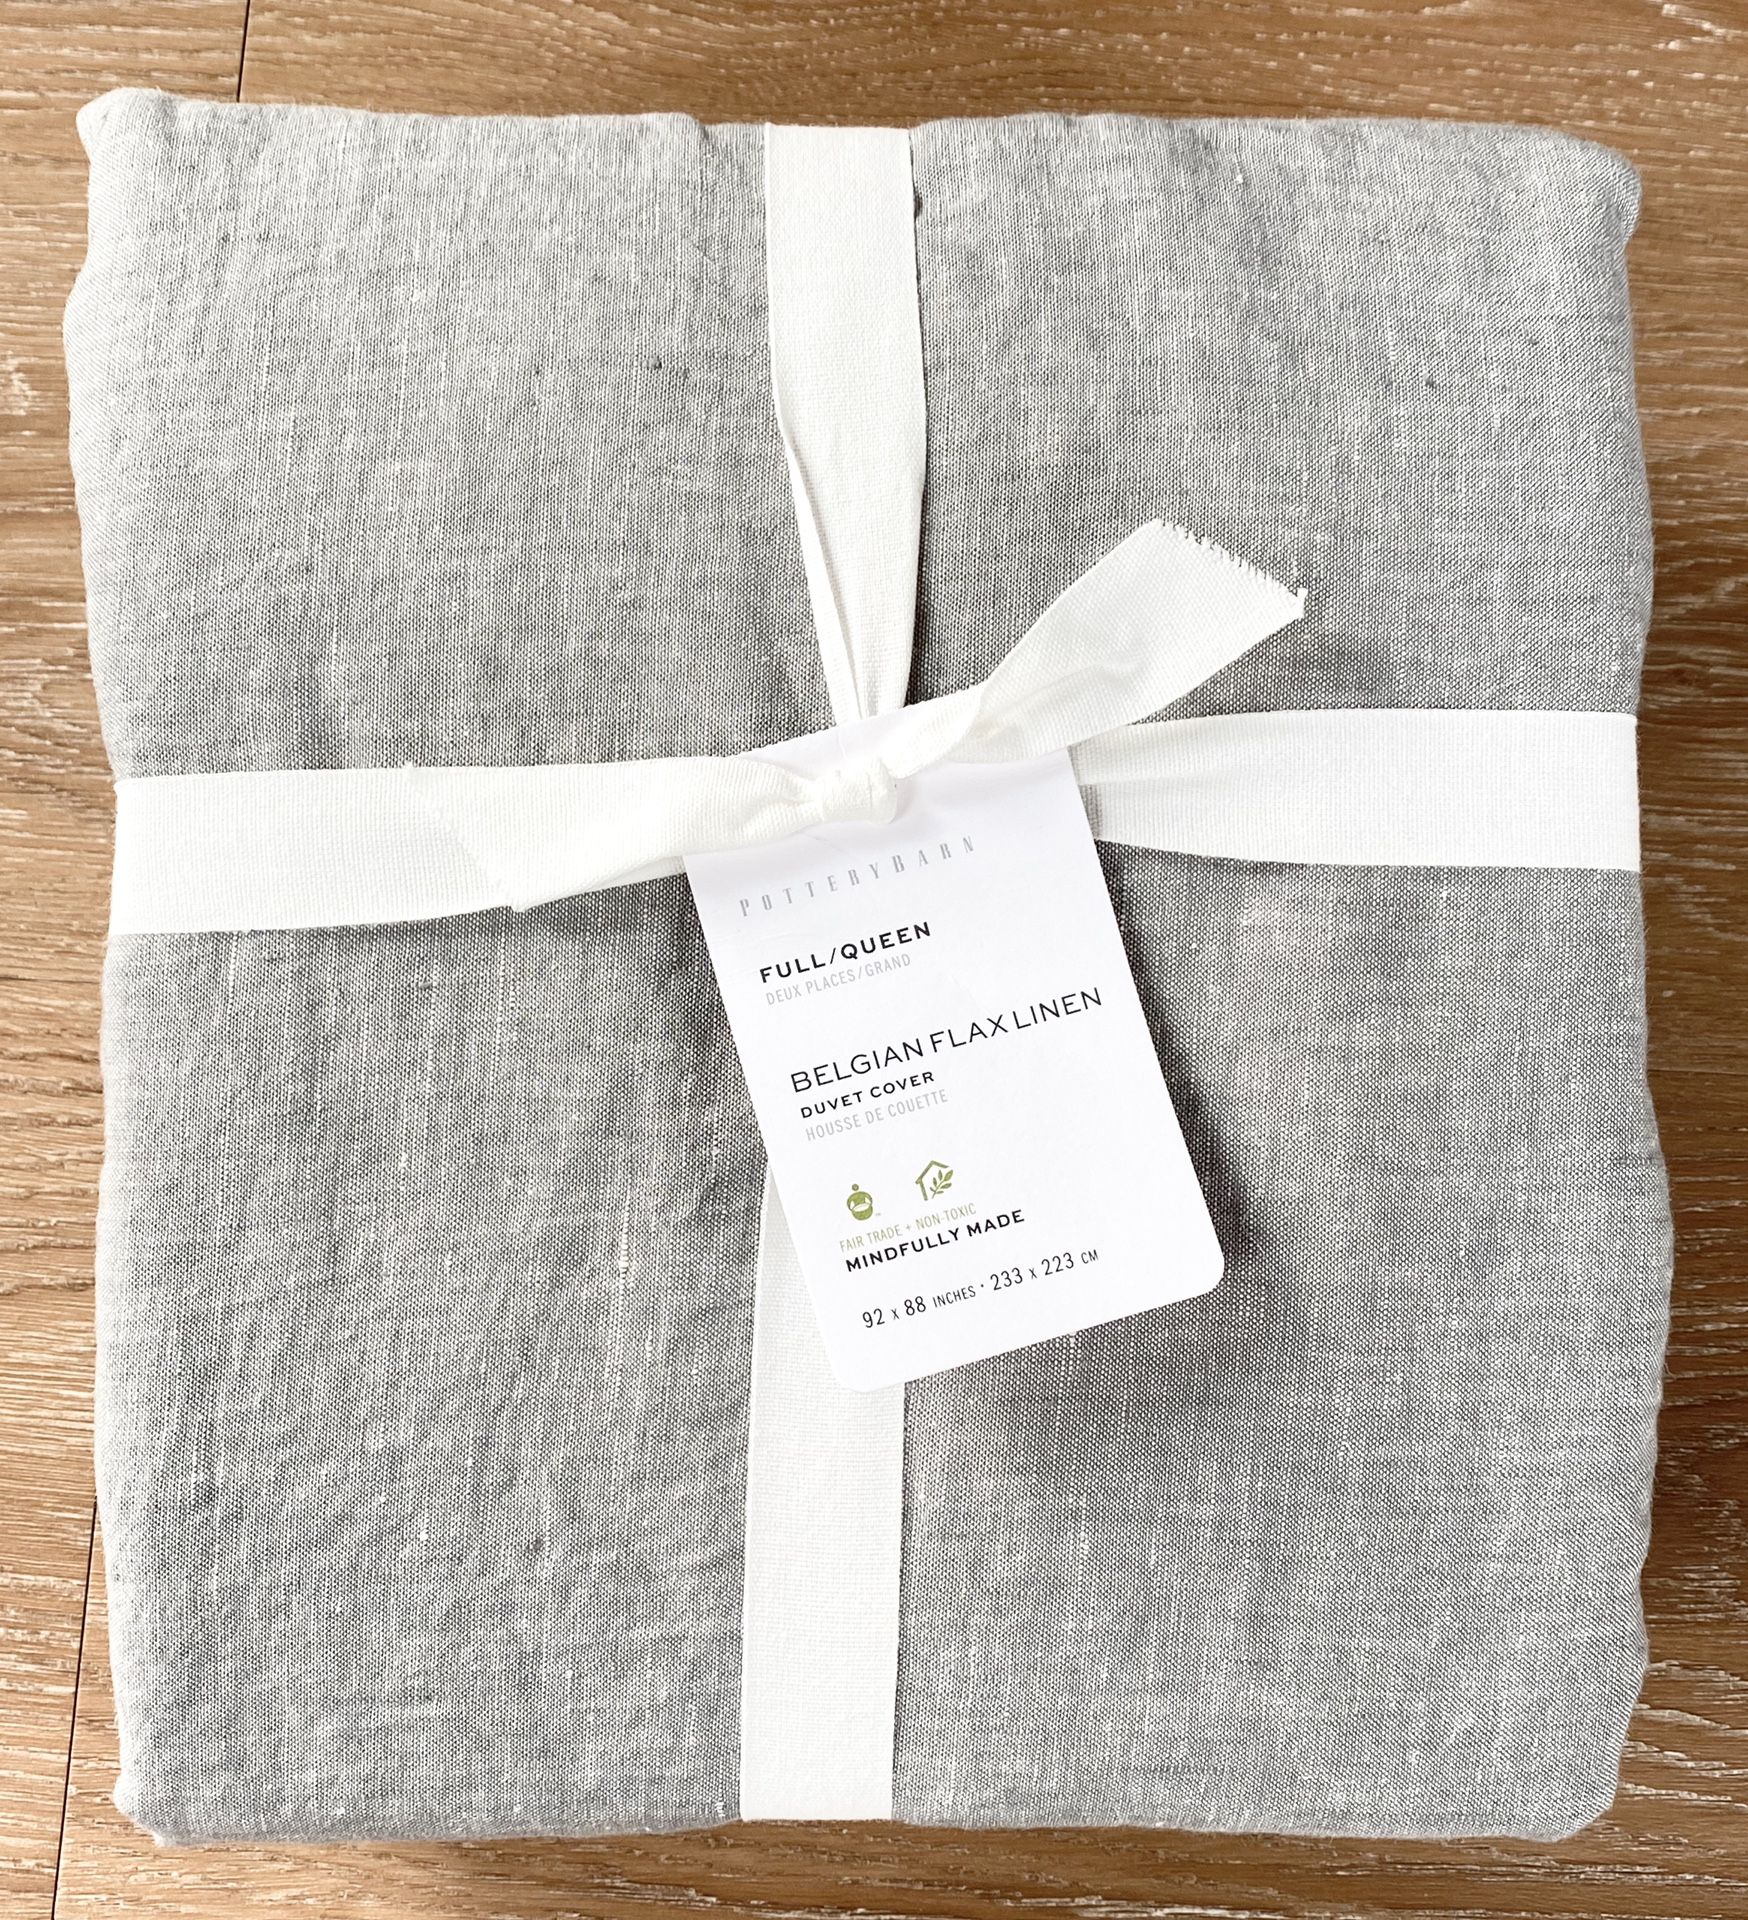 Pottery Barn Full/Queen Belgian Flax Linen Duvet Cover in Flagstone, NWT. Retail $279 *Reduced